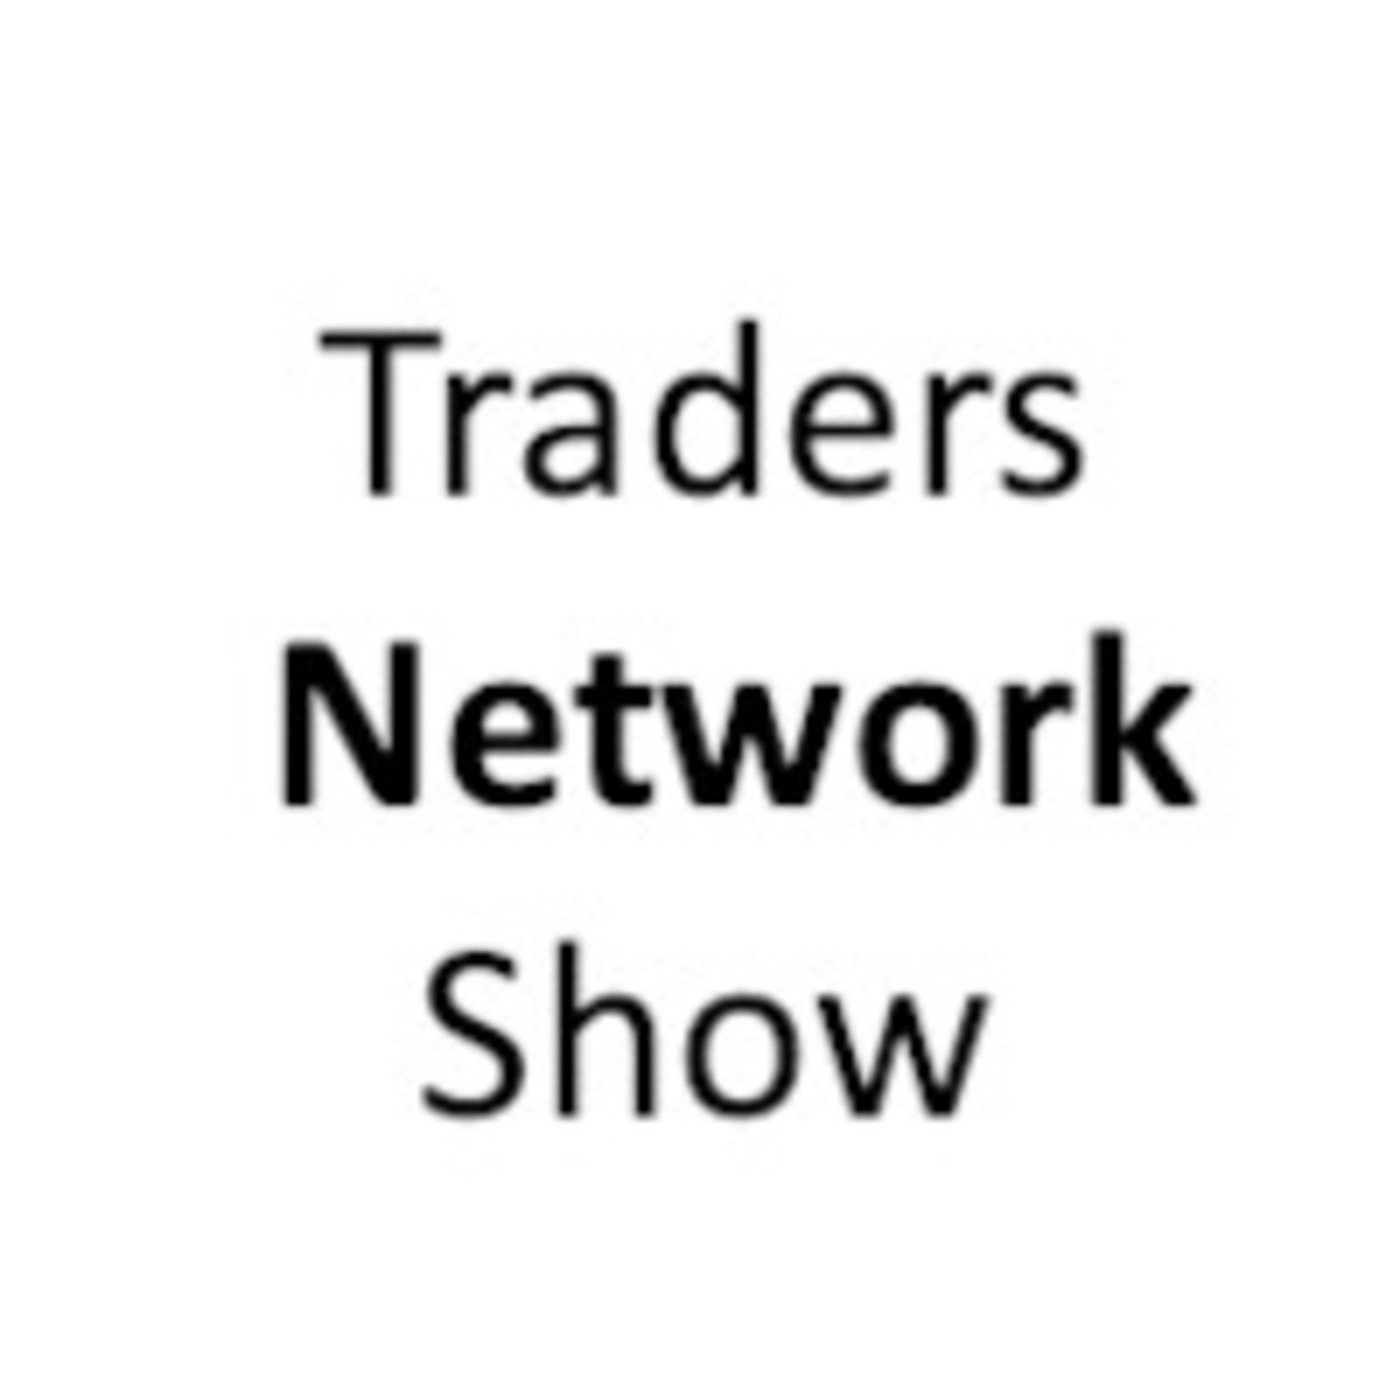 Traders Network Show